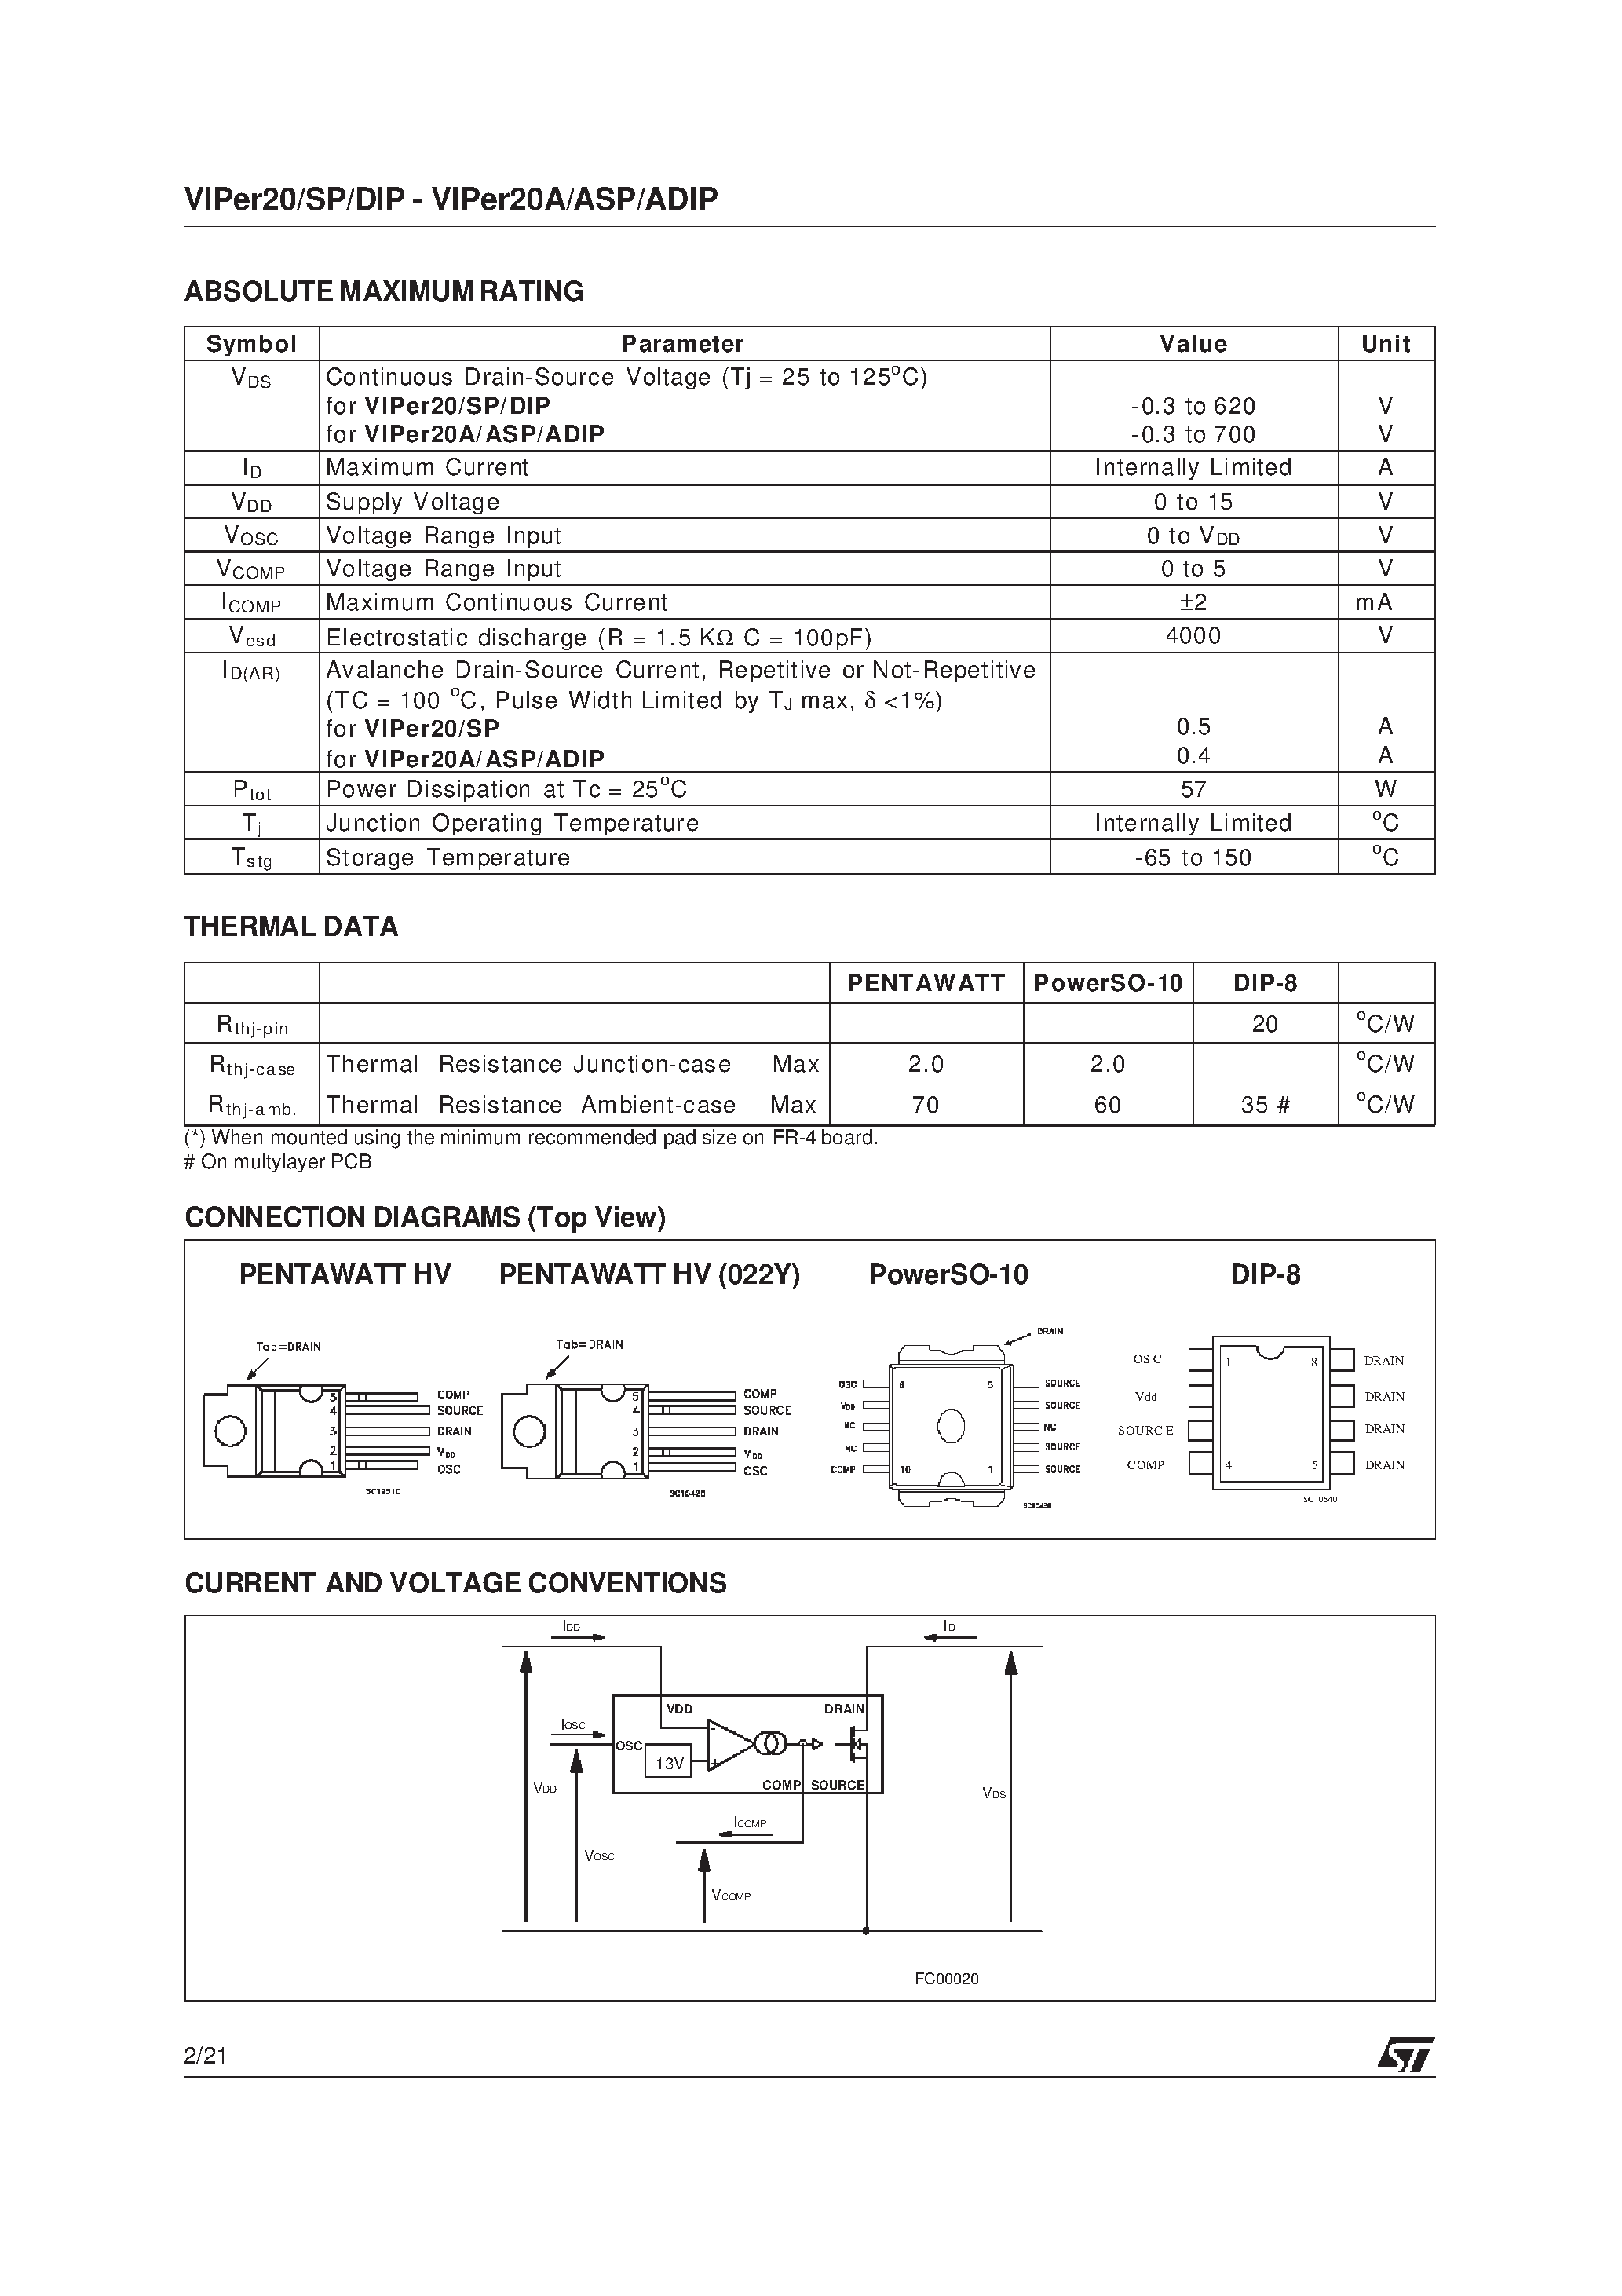 Datasheet VIPer20DIP - SMPS PRIMARY I.C. page 2